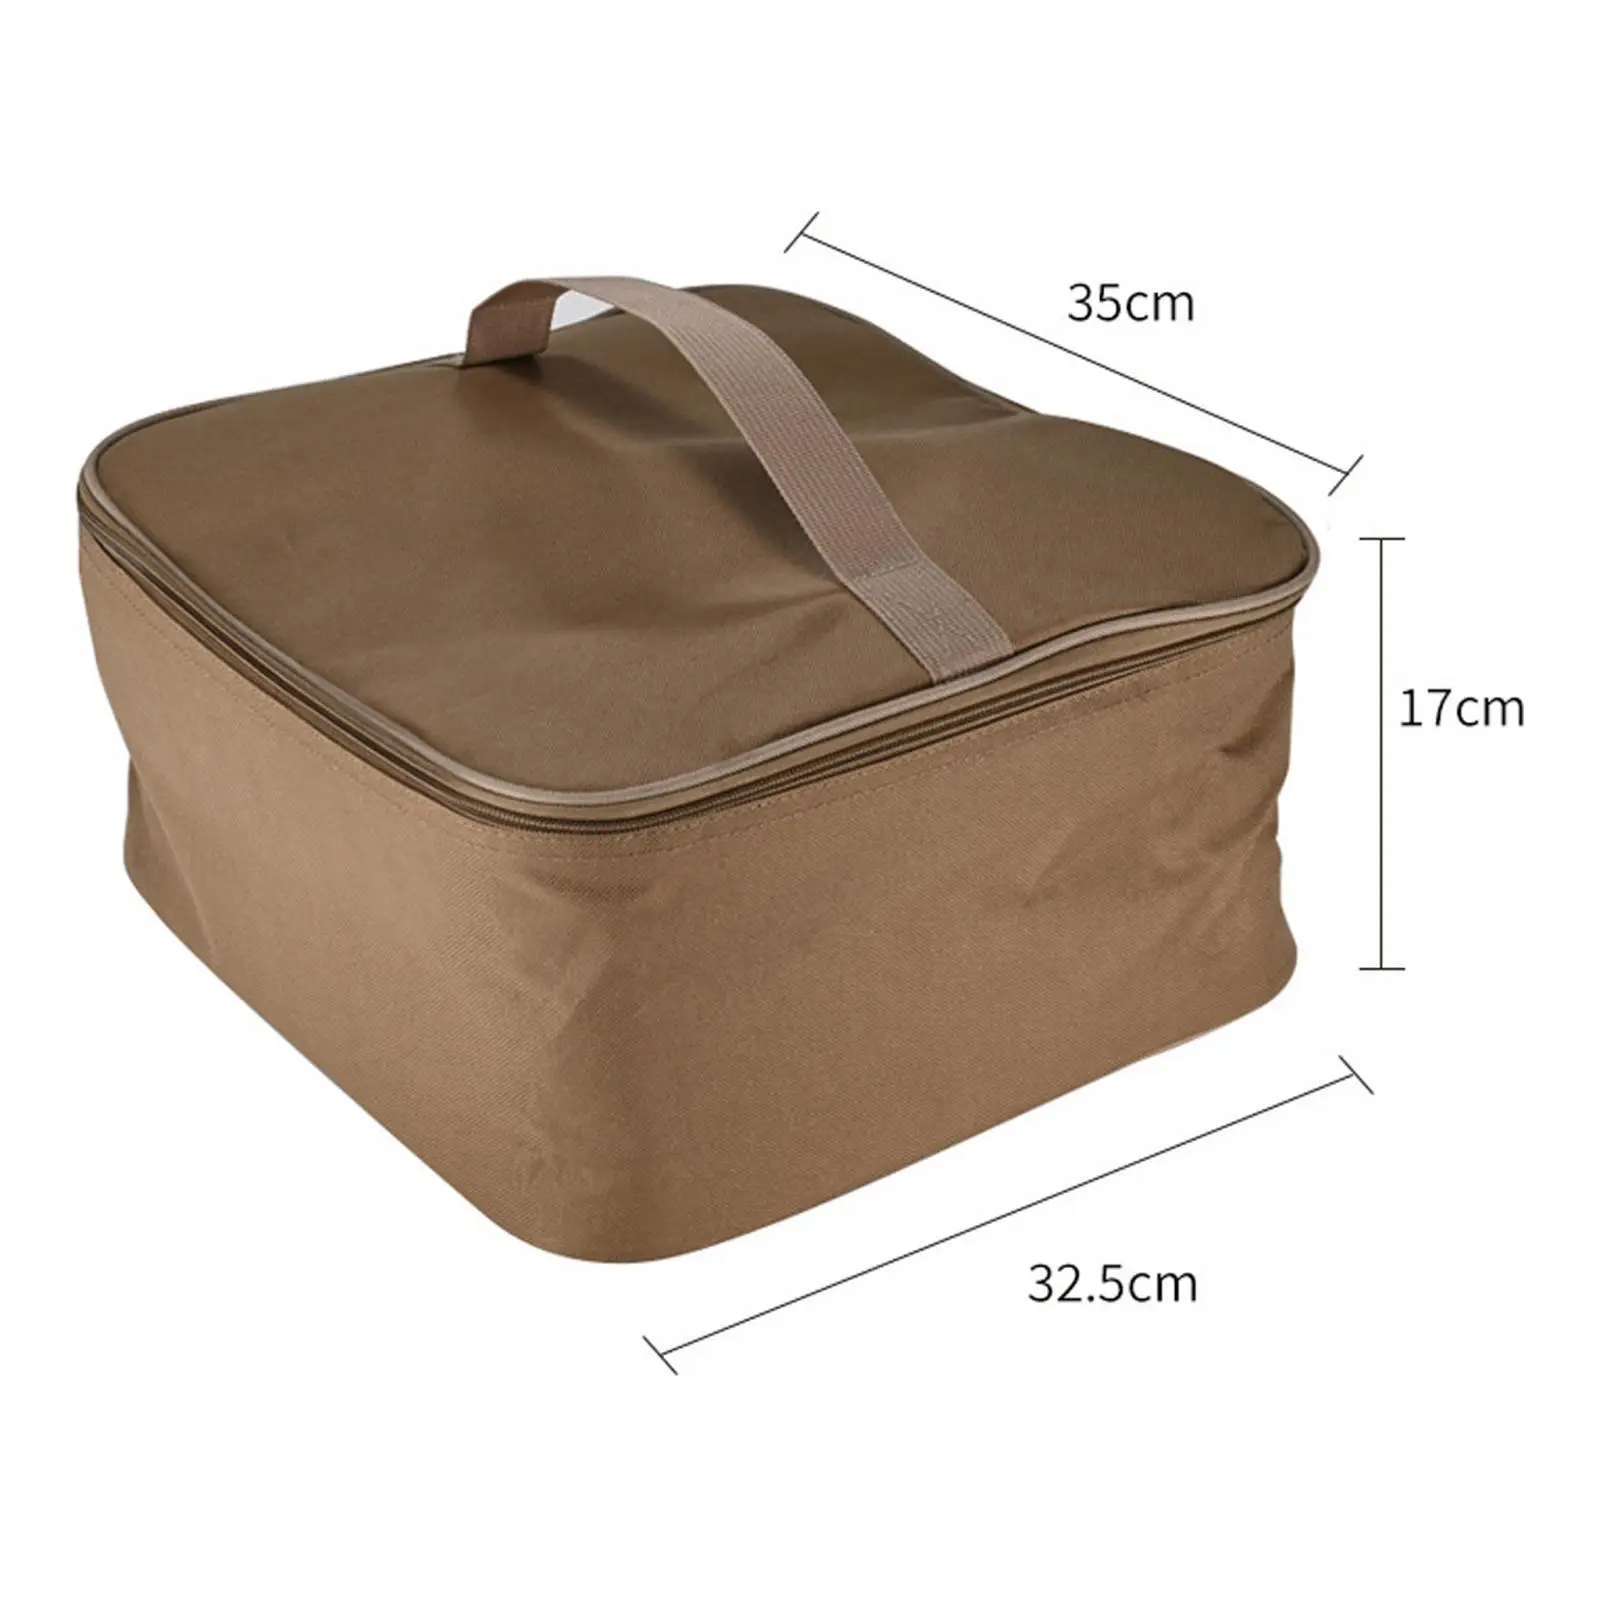 Gas Tank Storage Bag Multifunctional Net Pocket BBQ Tool Bag Camping Stove Carry Bag for Party Road Trip BBQ Outdoor Traveling